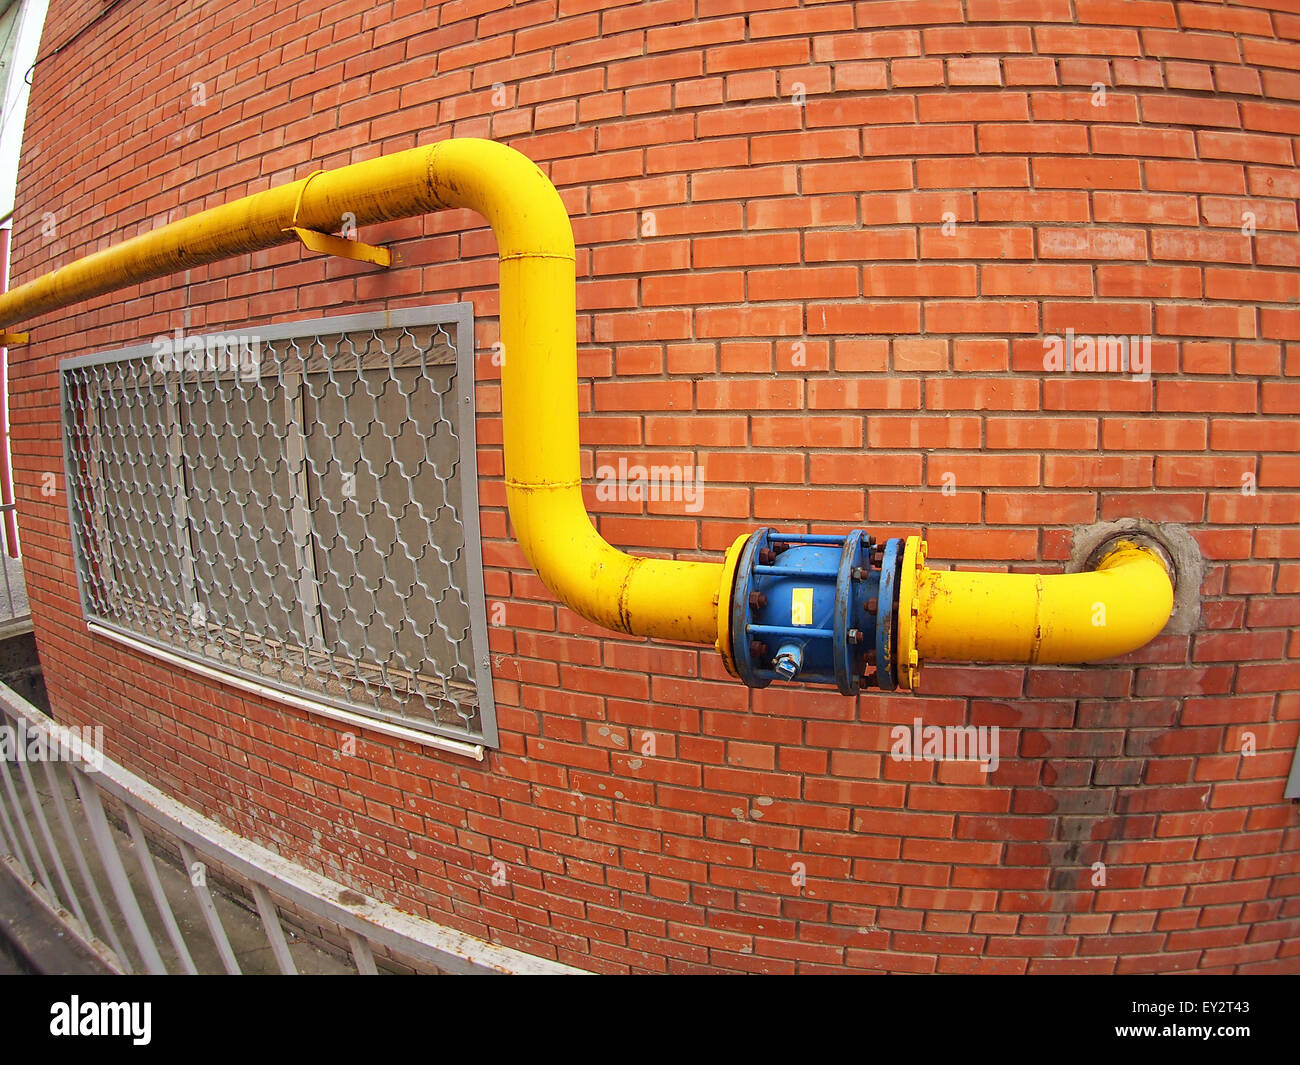 Wall of a building with a yellow gas pipe and a large valve with wide angle fisheye view Stock Photo